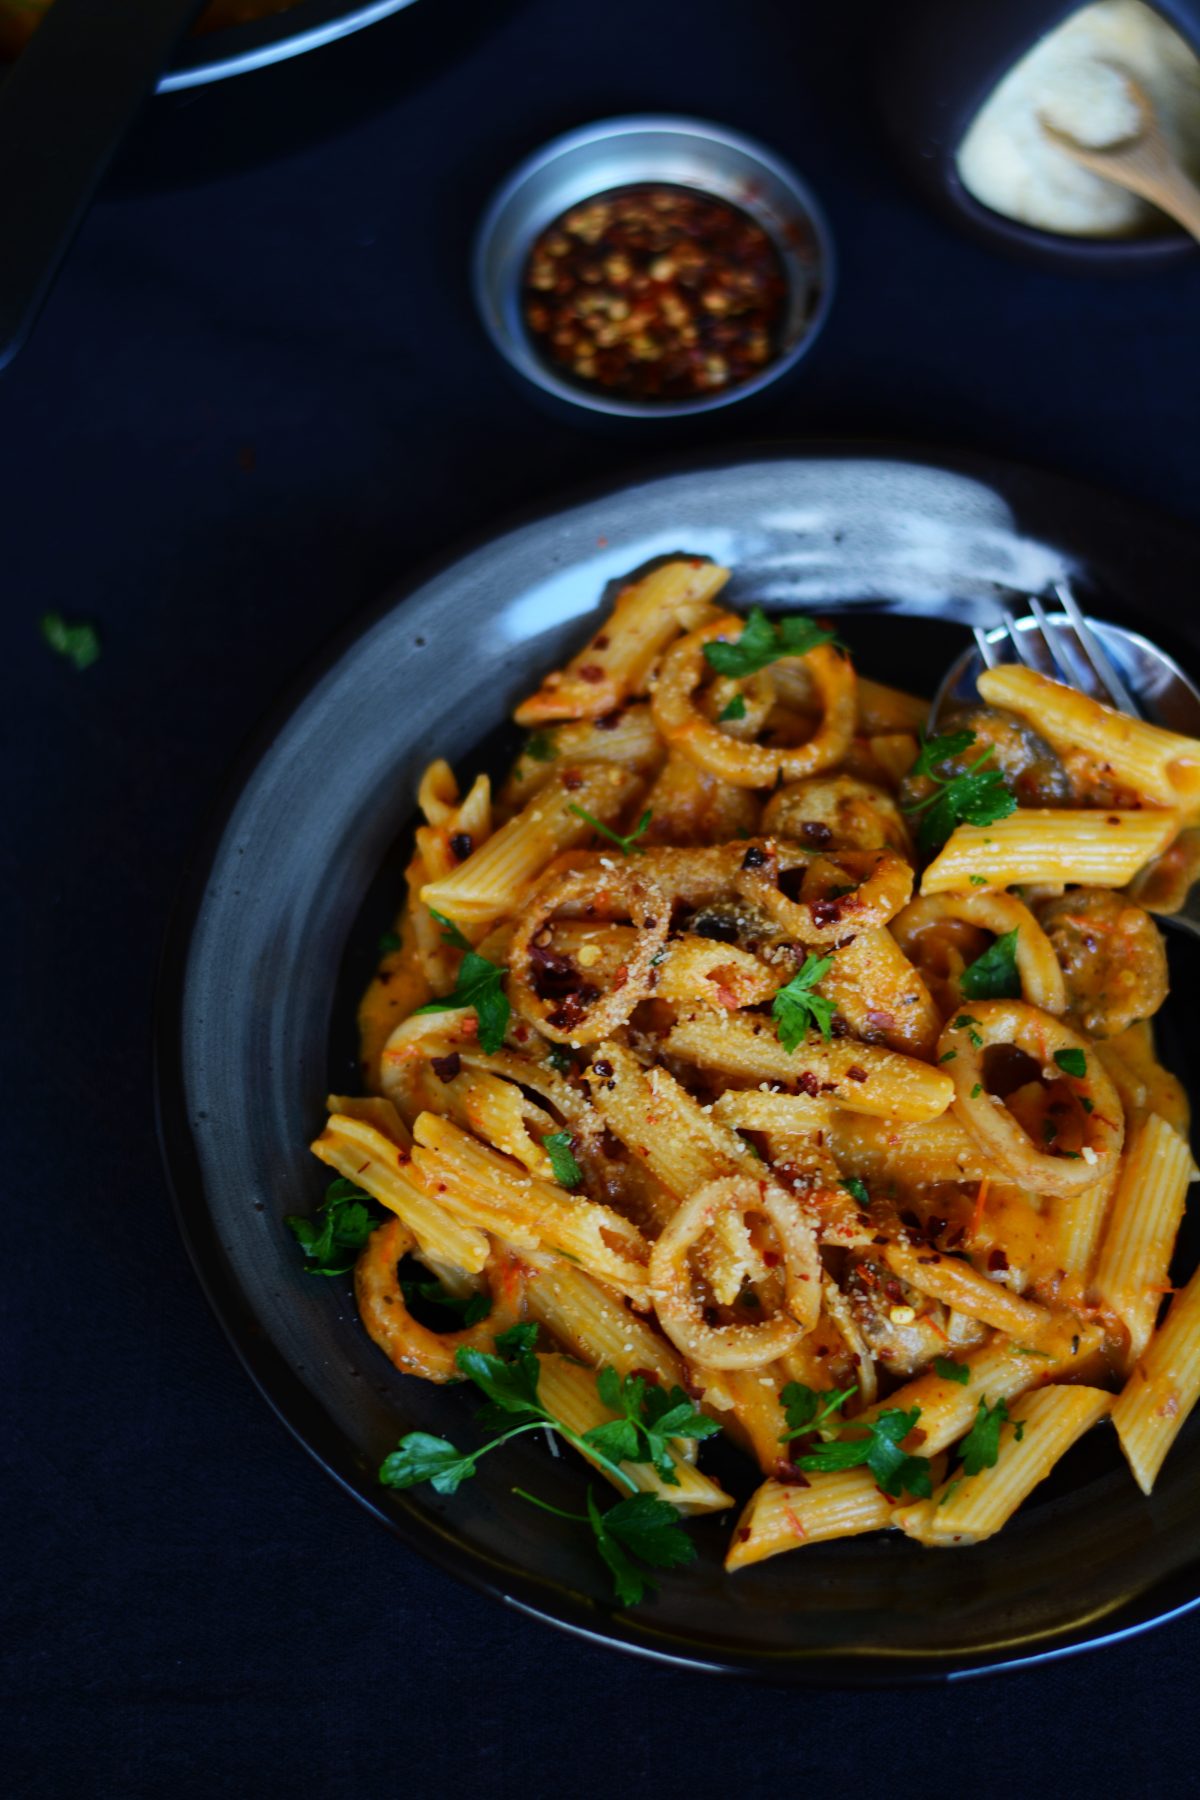 Penne with Chilli Squid in a Roasted Tomato Sauce - simple, delicious and full of flavour - thespiceadventuress.com